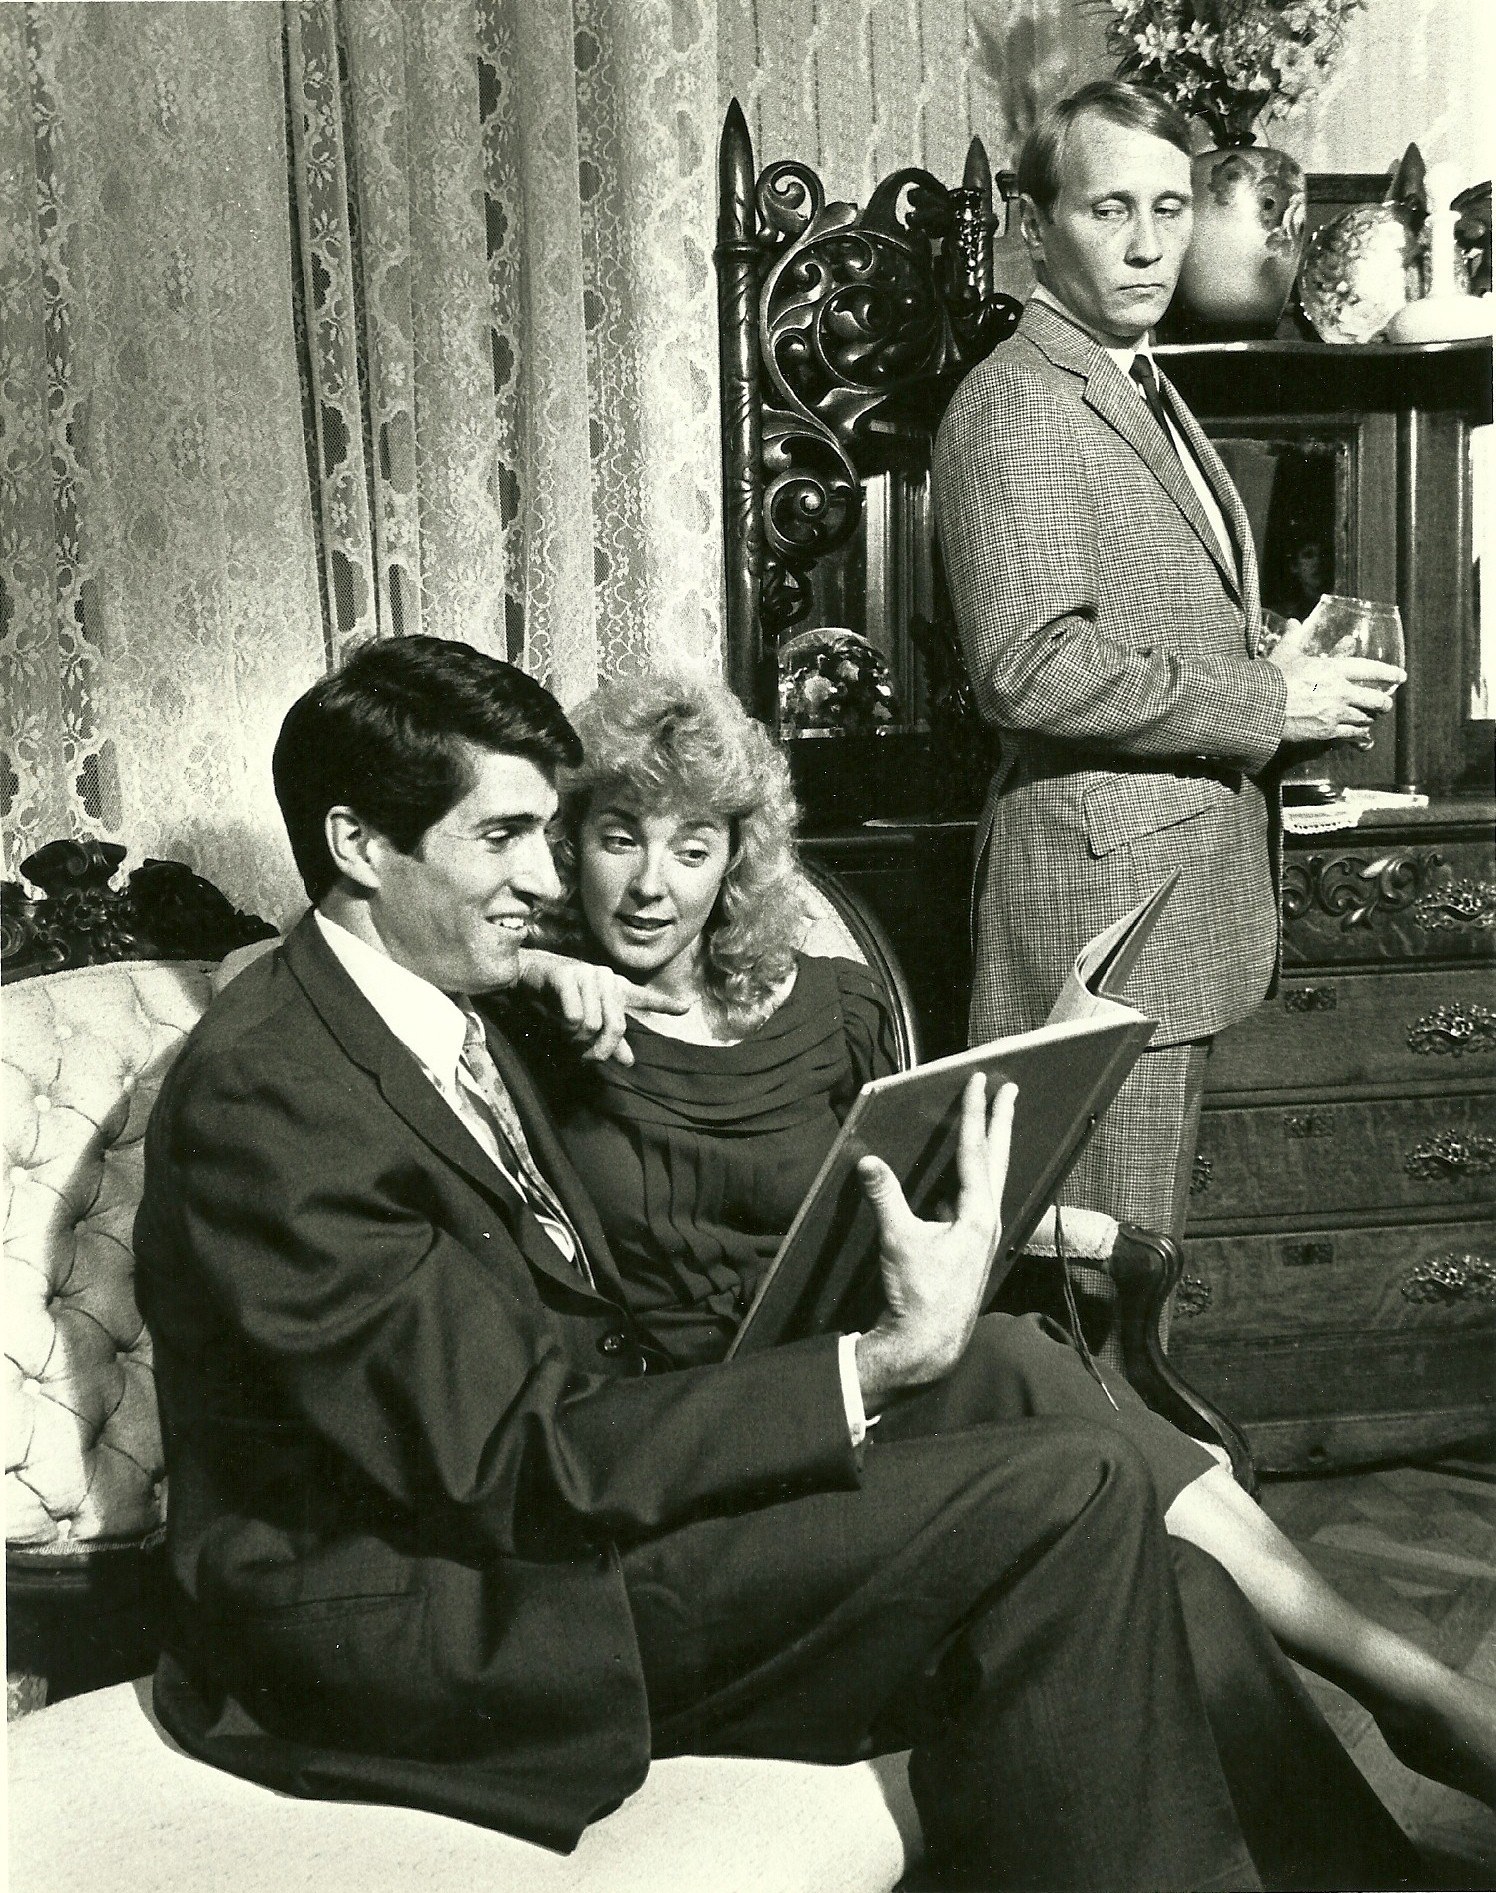 "Dial M for Murder, directed by Randal K. West and produced by Chris Curcio at 3rd Street Theatre April 14-27, 1985, featured David Helmstetter (left), Cathy Dresbach and Chris Witt in the cast. (Memorabilia courtesy of David Helmstetter) (The photo was staged at the historic Rosson House in downtown Phoenix.)